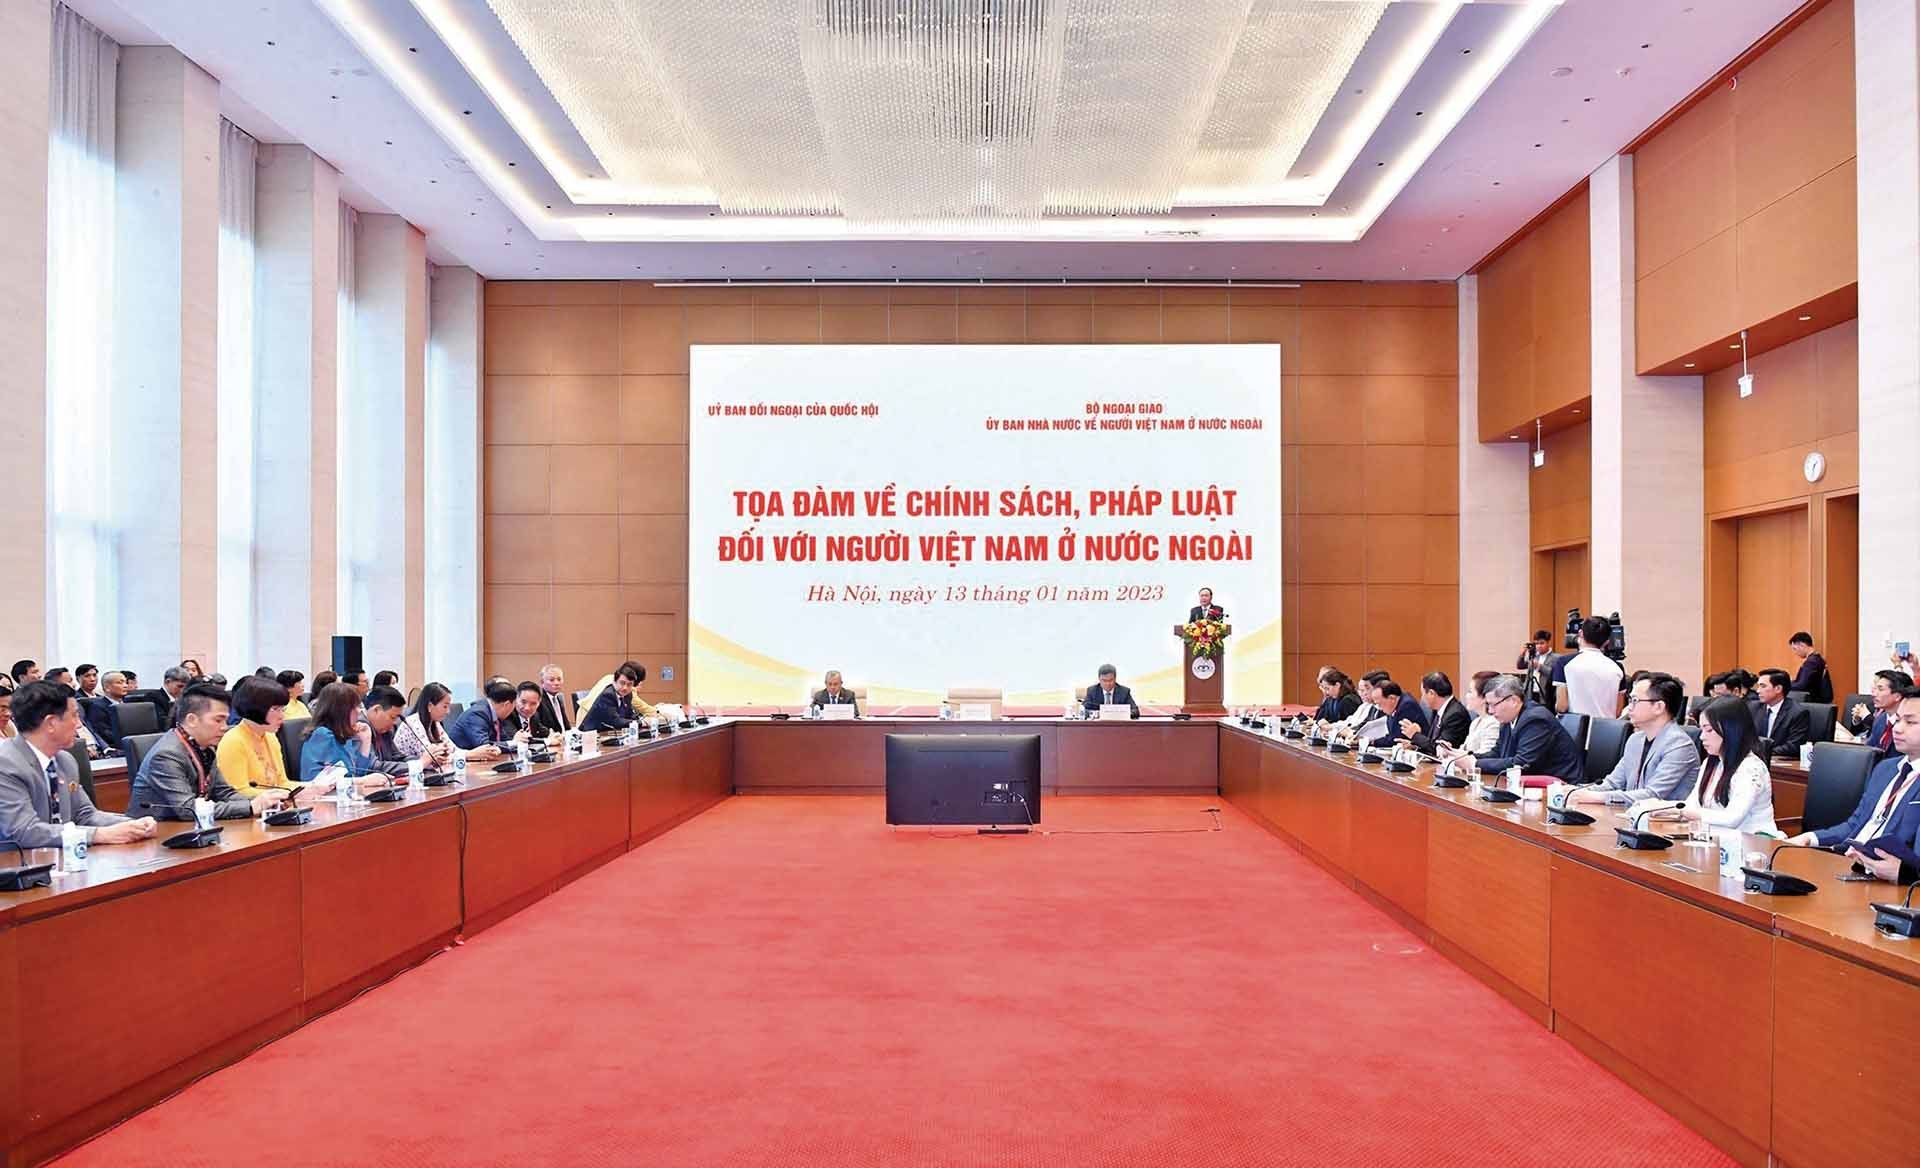 The National Assembly’s Foreign Affairs Committee and the State Committee for Overseas Vietnamese  (Ministry of Foreign Affairs) jointly organized a discussion on policies and laws towards Vietnamese overseas  on January 13, 2023 in Hanoi.